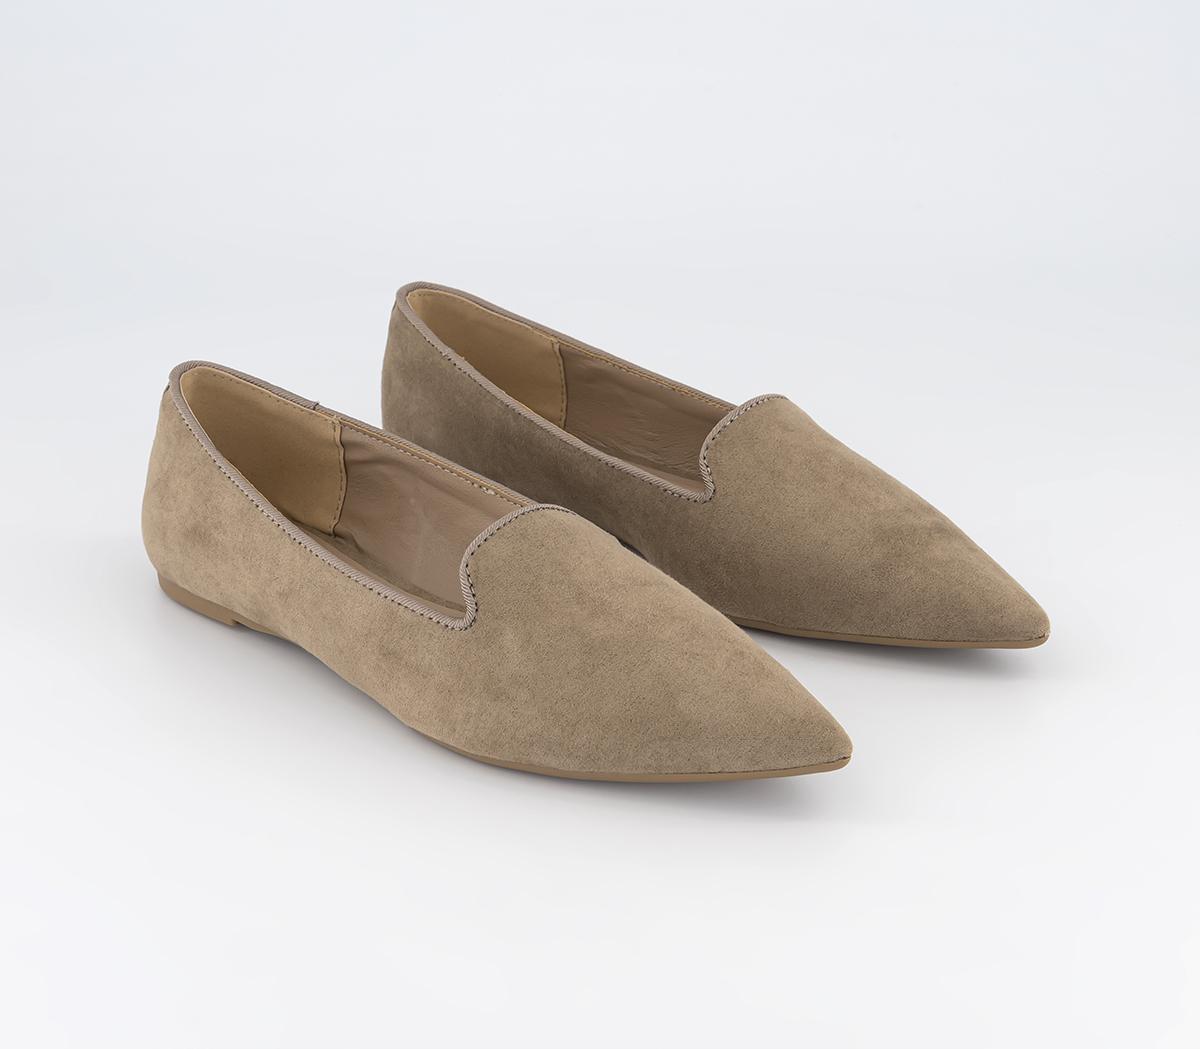 OFFICE Womens Fabulous Pointed Slipper Cut Ballet Flats Taupe, 5